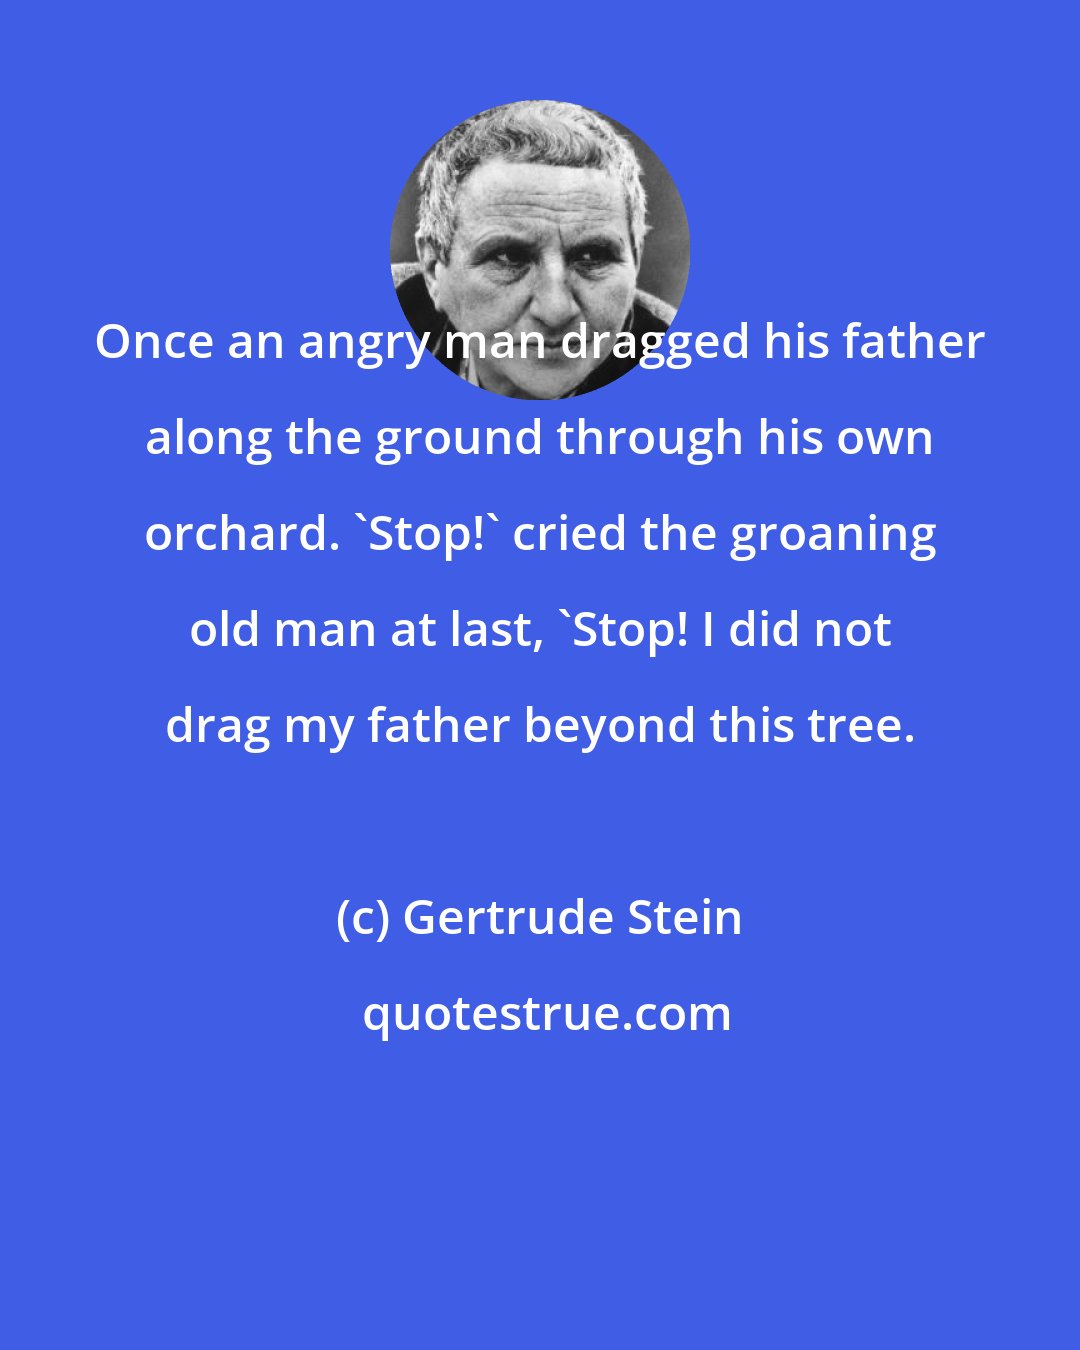 Gertrude Stein: Once an angry man dragged his father along the ground through his own orchard. 'Stop!' cried the groaning old man at last, 'Stop! I did not drag my father beyond this tree.